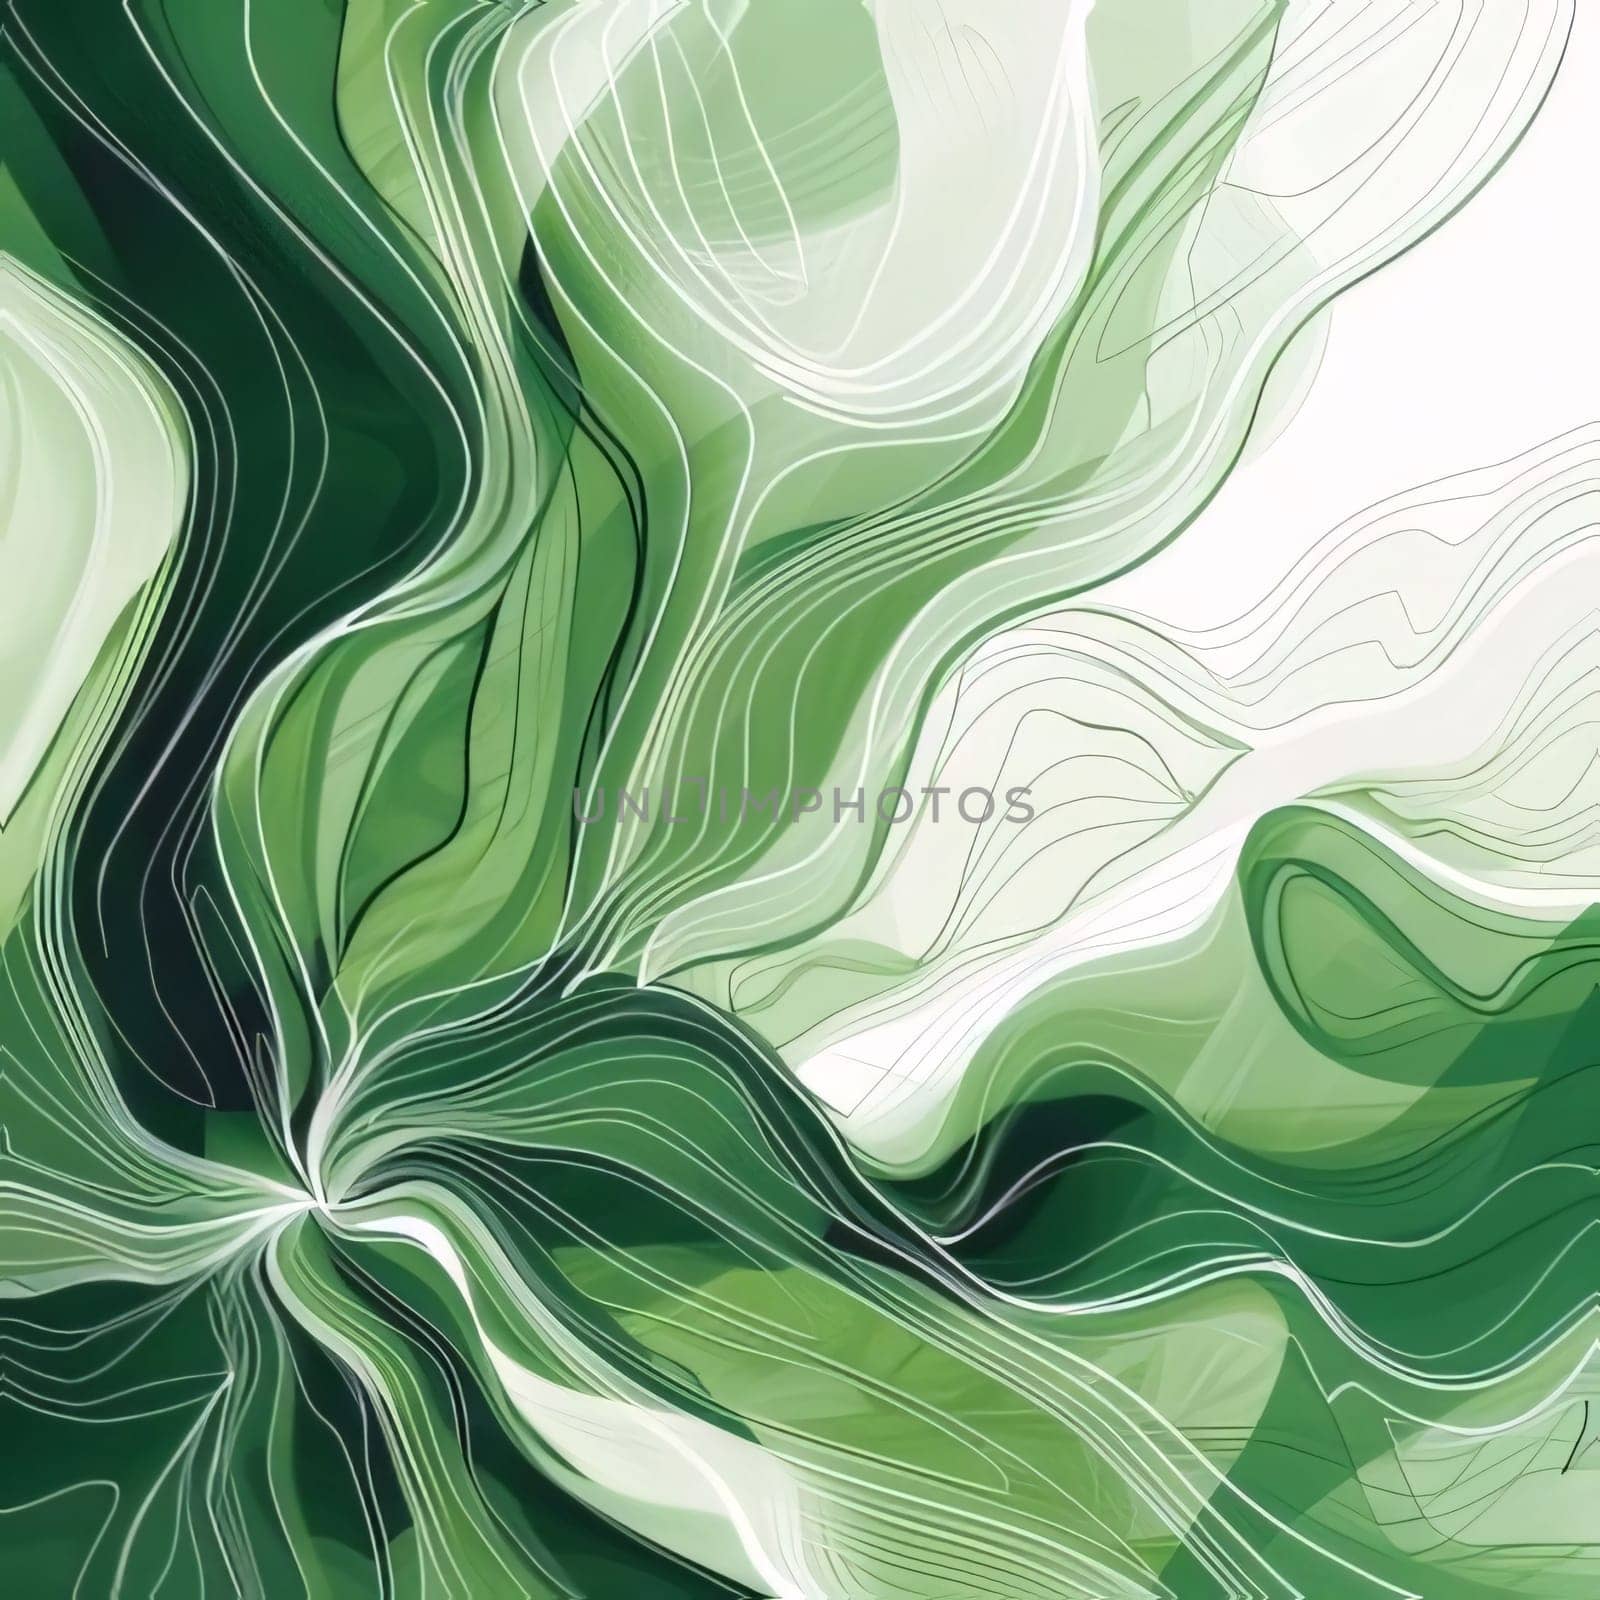 Abstract green background with lines and waves. Vector illustration for your design by ThemesS